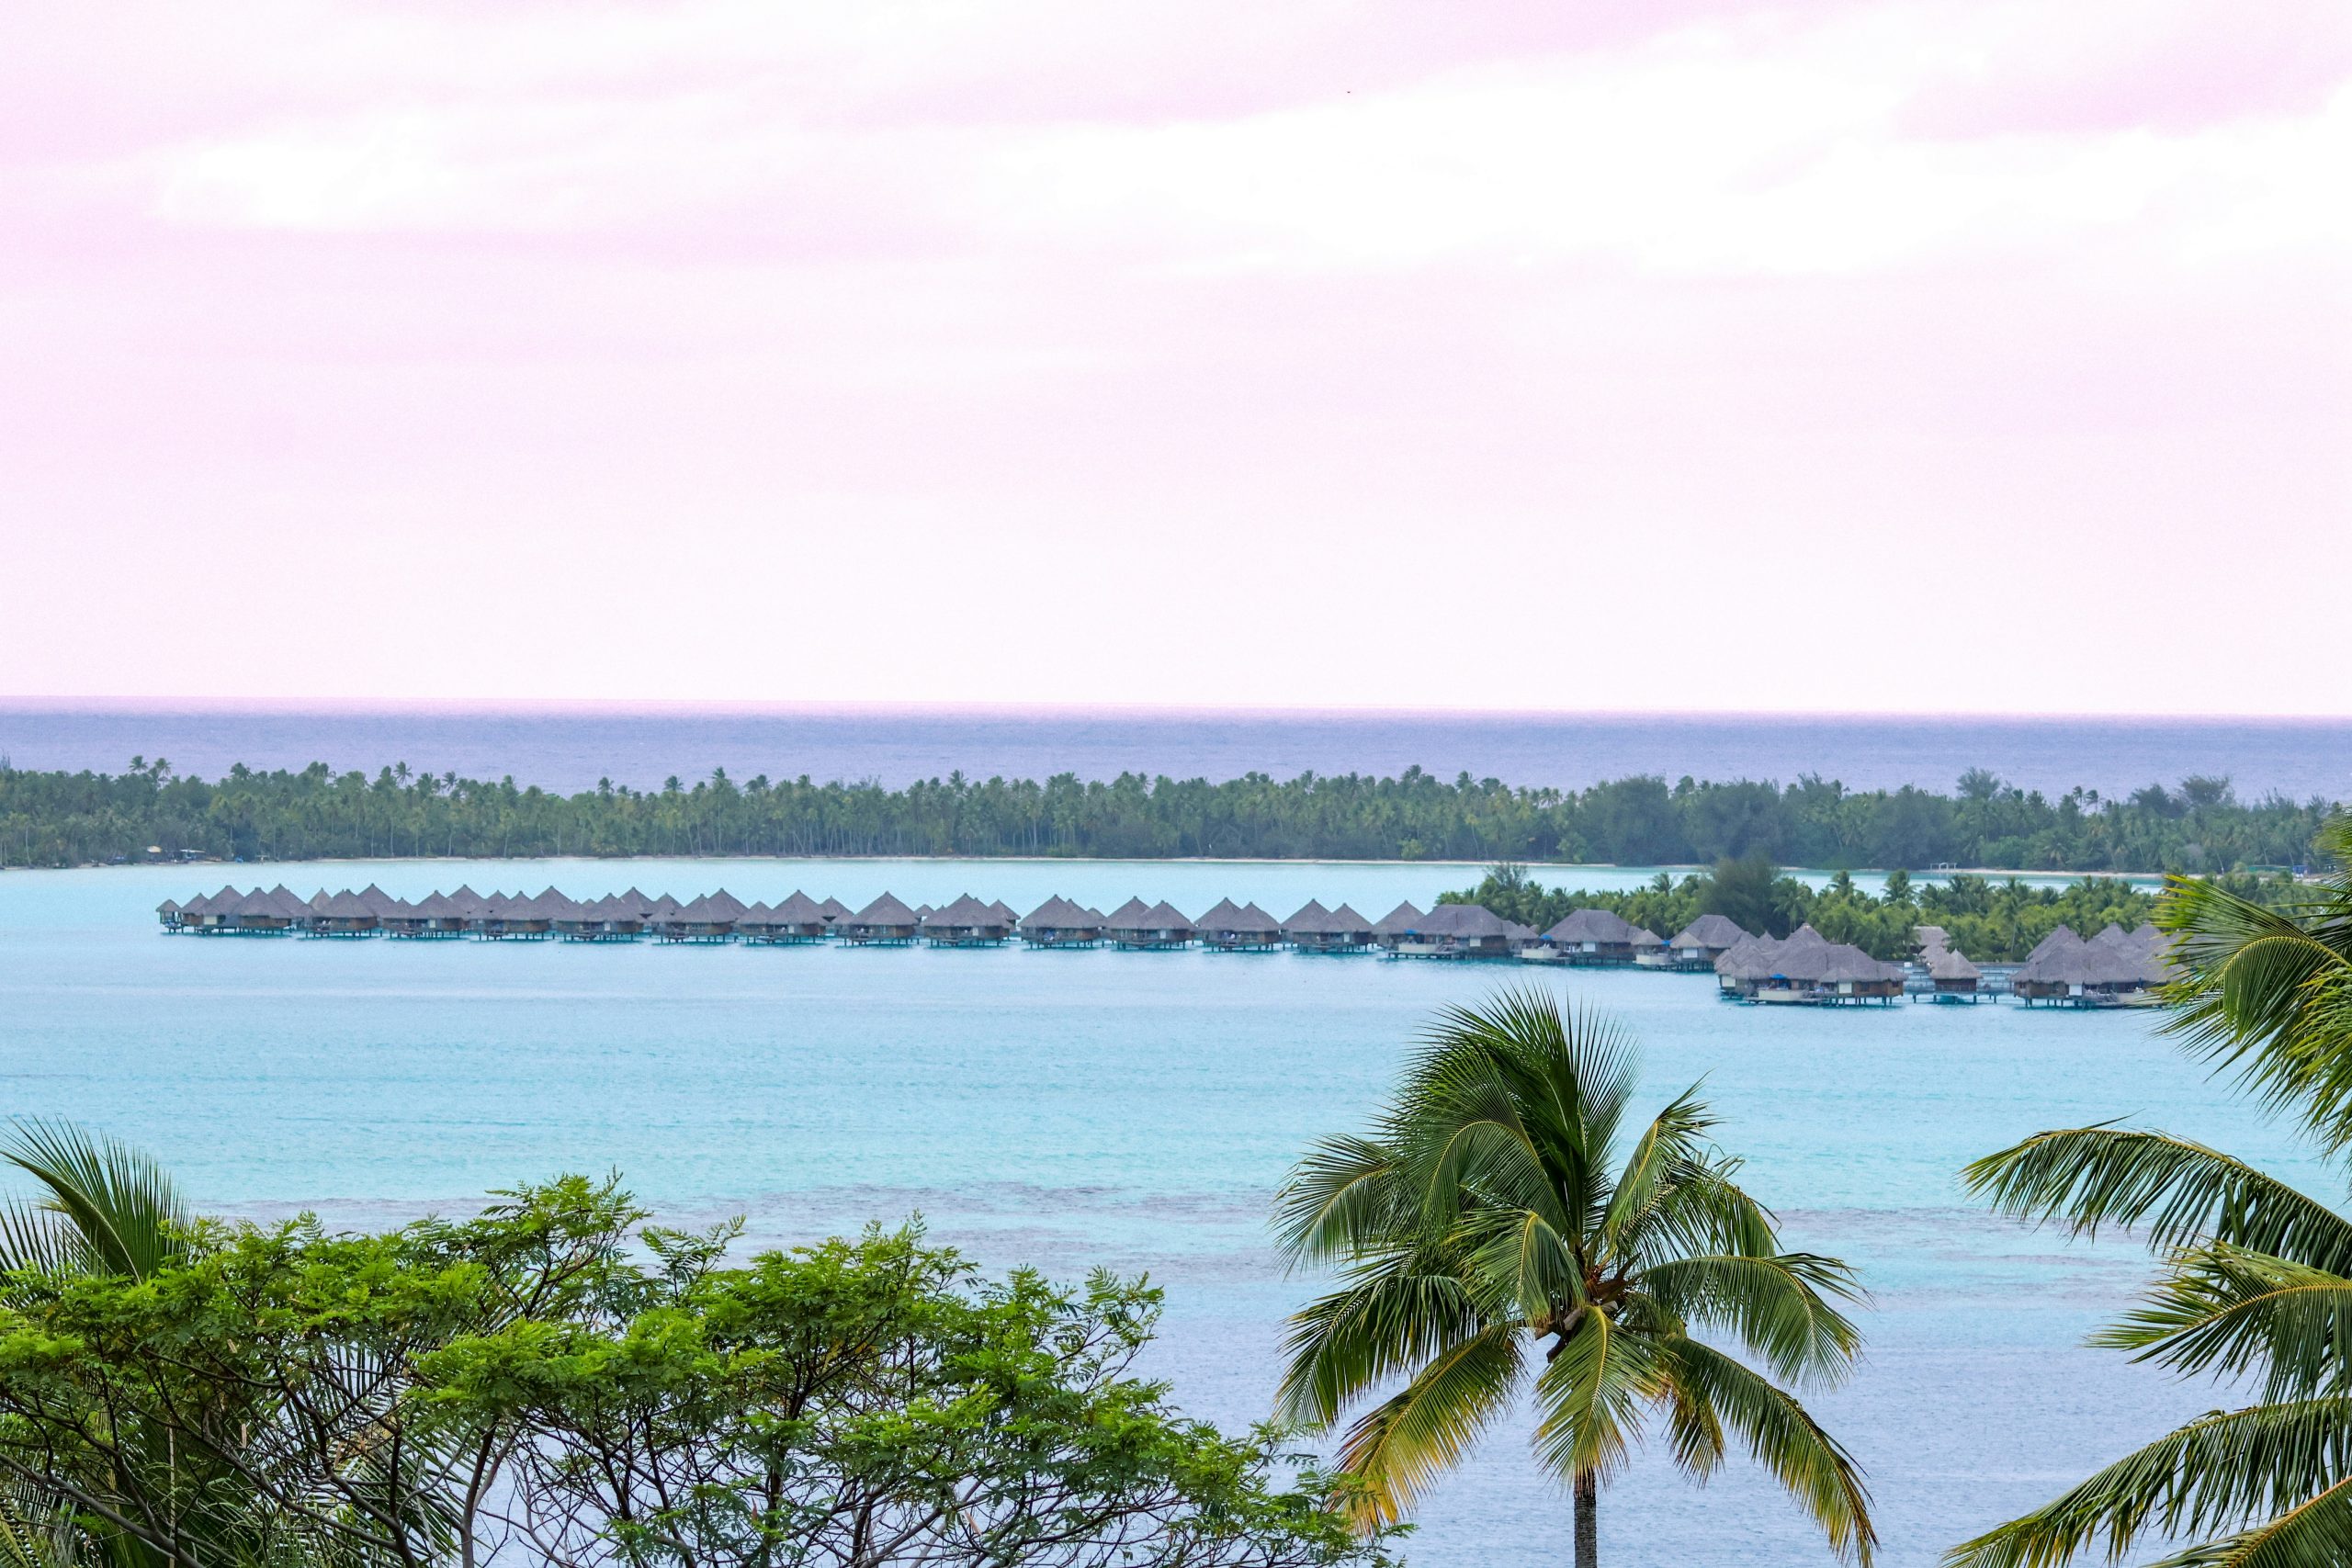 discover the beauty and adventure of tahiti with tahiti tourism. plan your dream vacation to this tropical paradise with our expert guidance and tips.